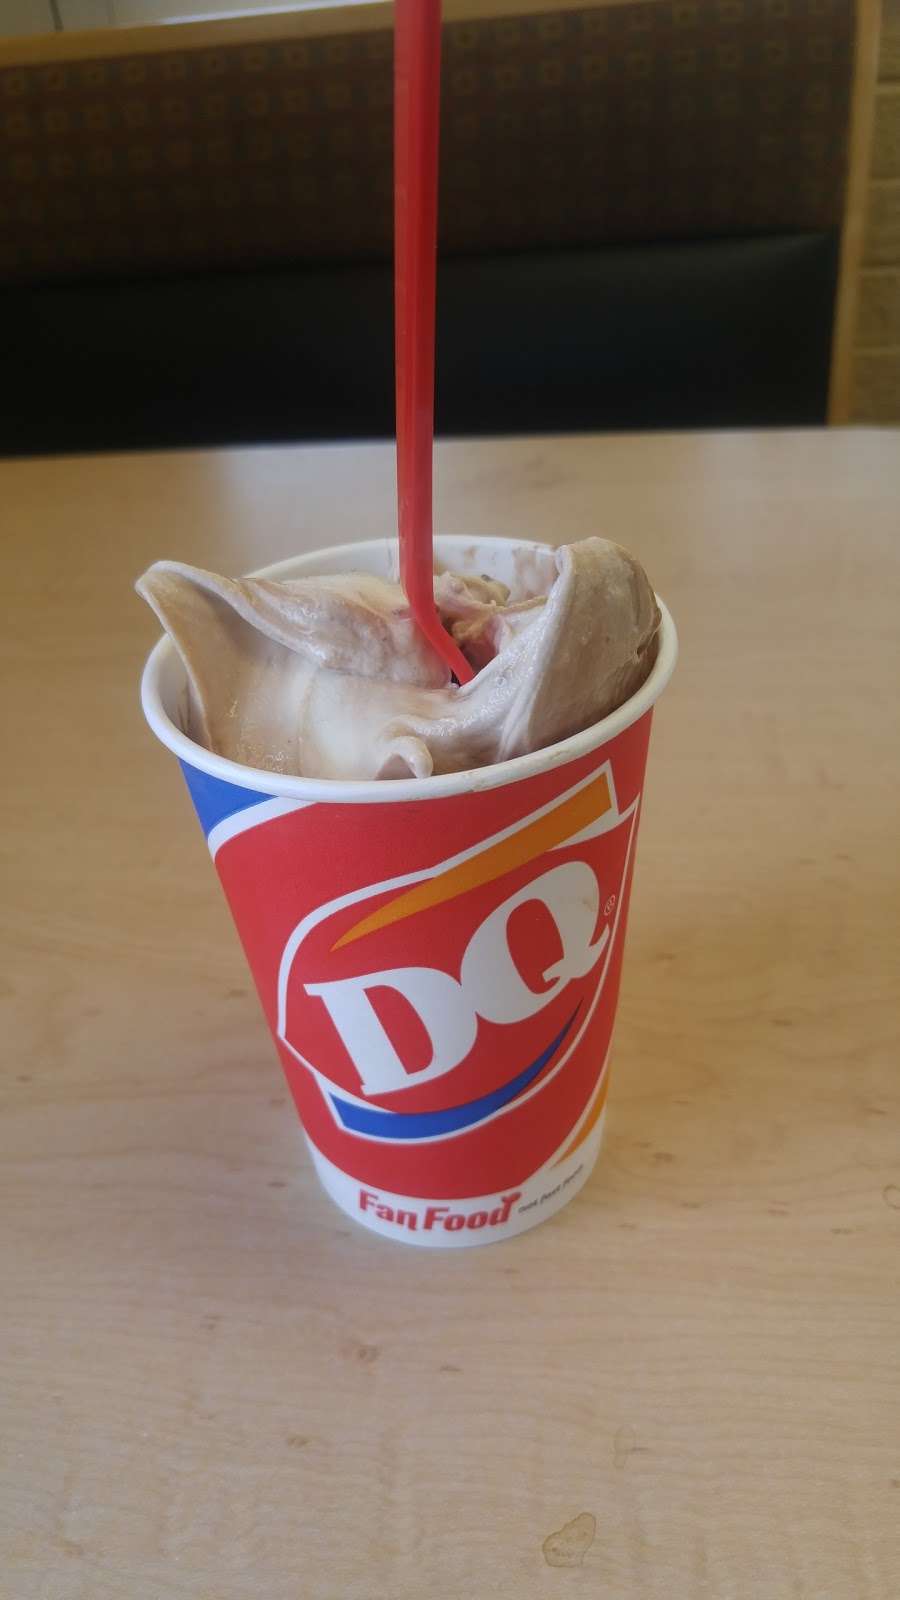 Dairy Queen Grill & Chill | 4650 S Yosemite St, Greenwood Village, CO 80111, USA | Phone: (303) 850-9151